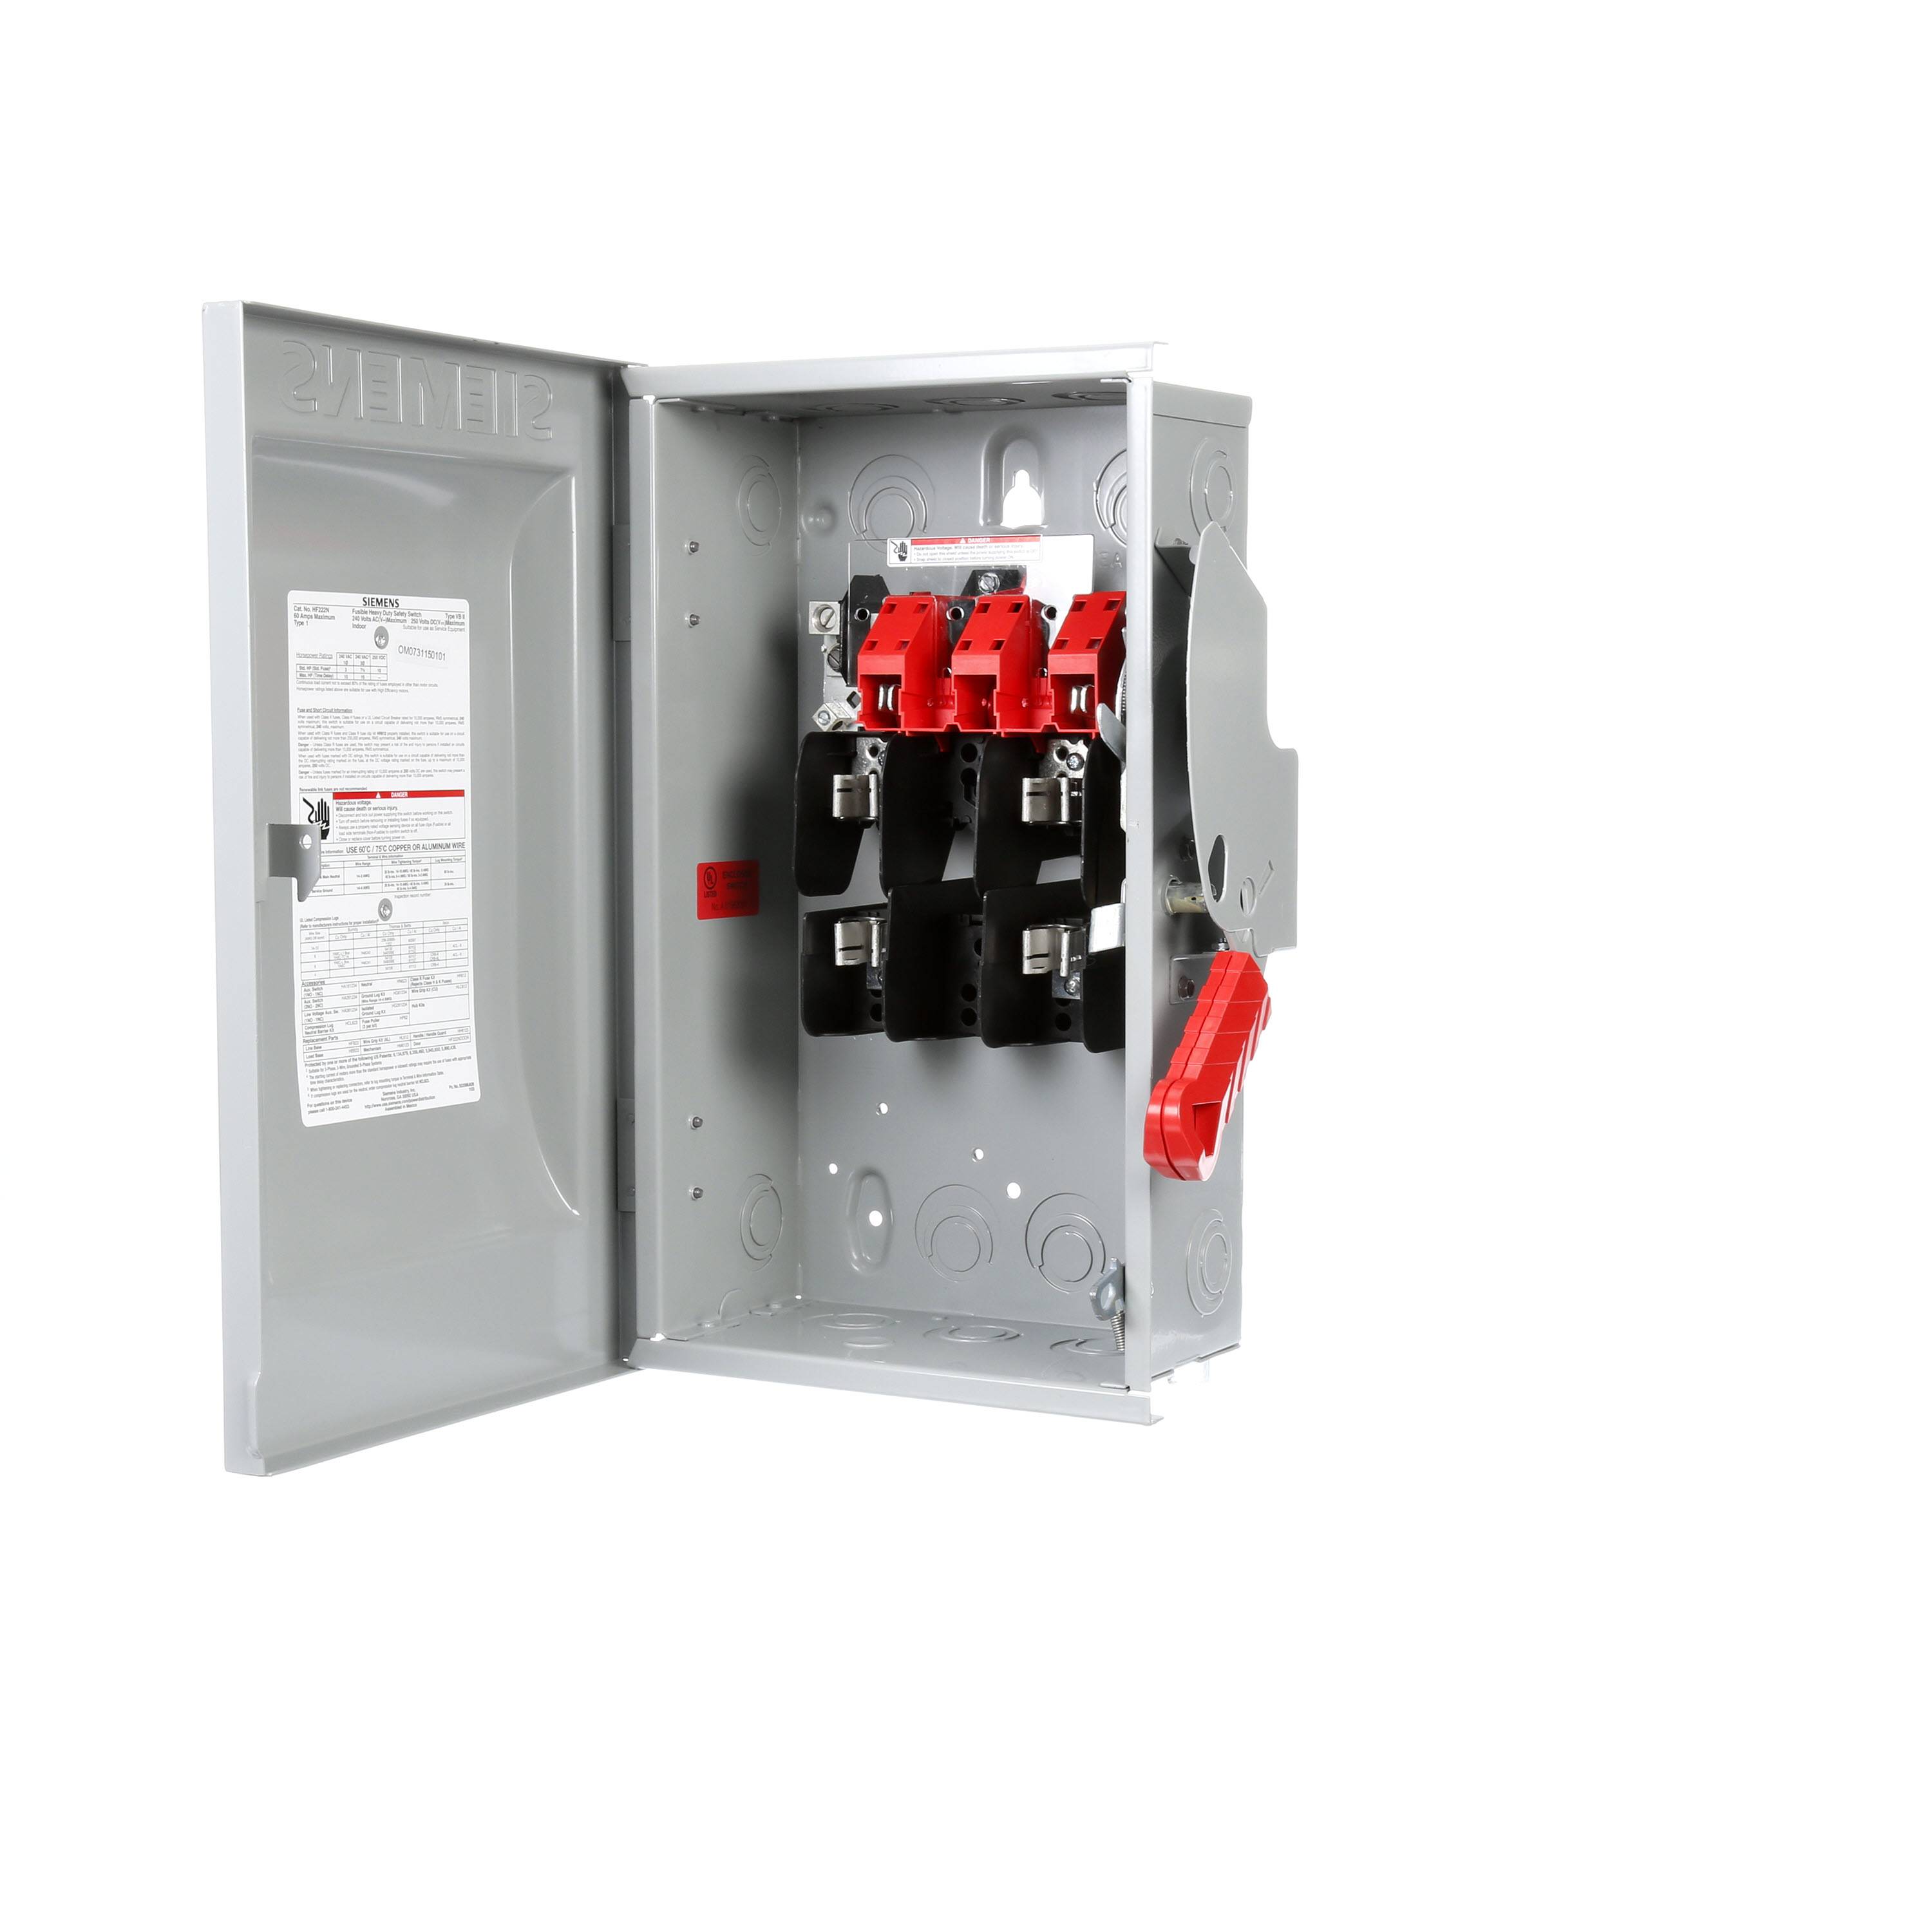 Siemens HF222N Type VBII Enclosed Fusible Heavy Duty Low Voltage Single Throw Safety Switch With Neutral, 240 VAC, 60 A, 3 hp, DPST Contact, 2 Poles